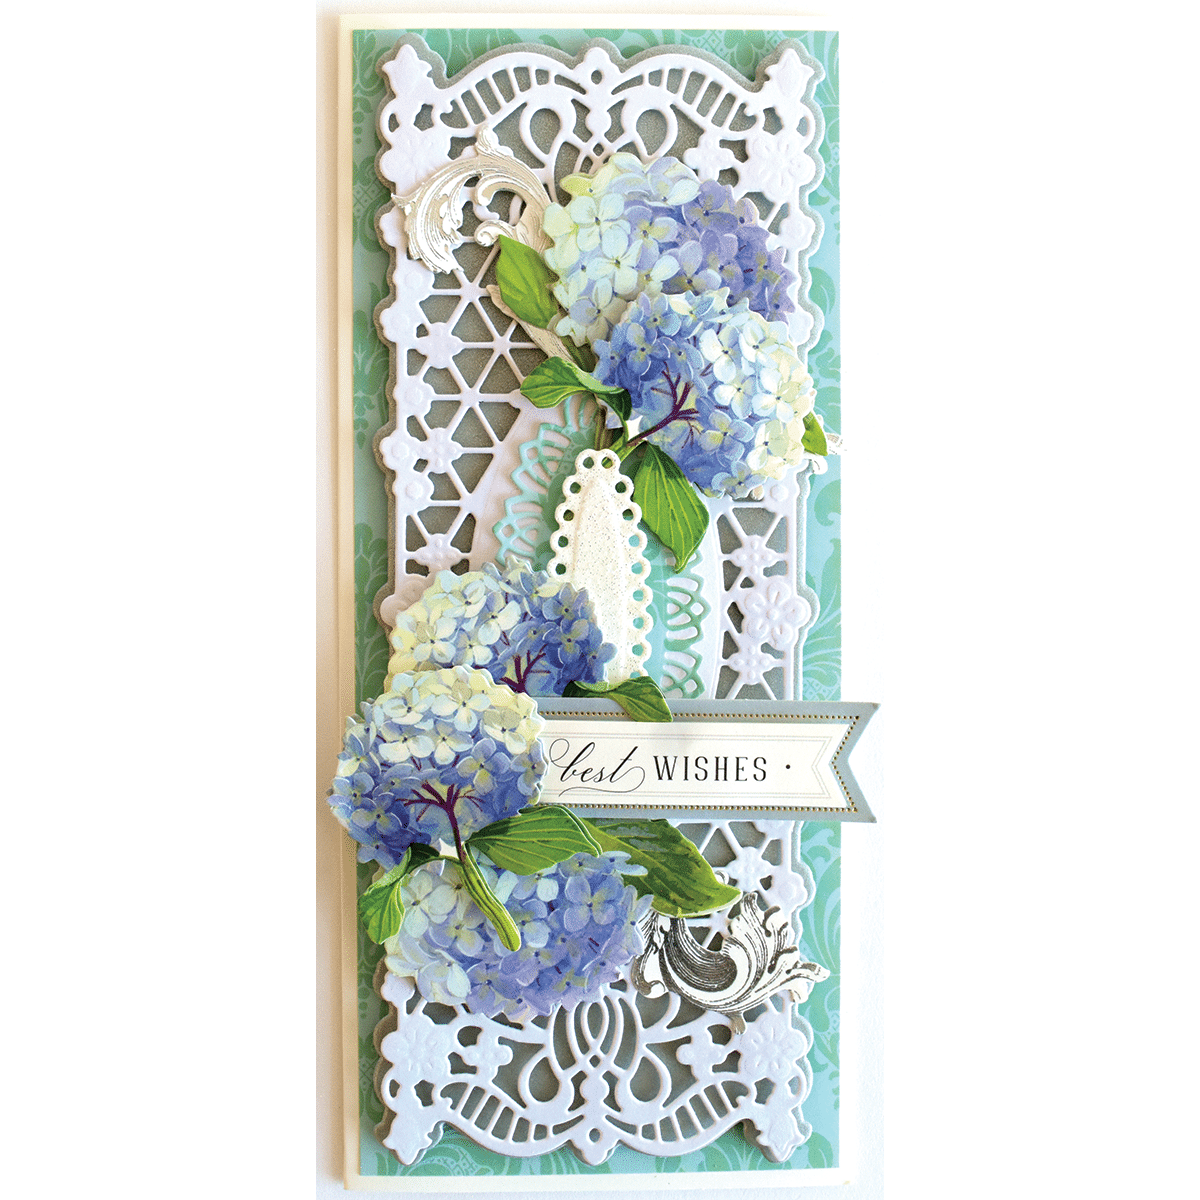 a card with blue and white flowers on it.